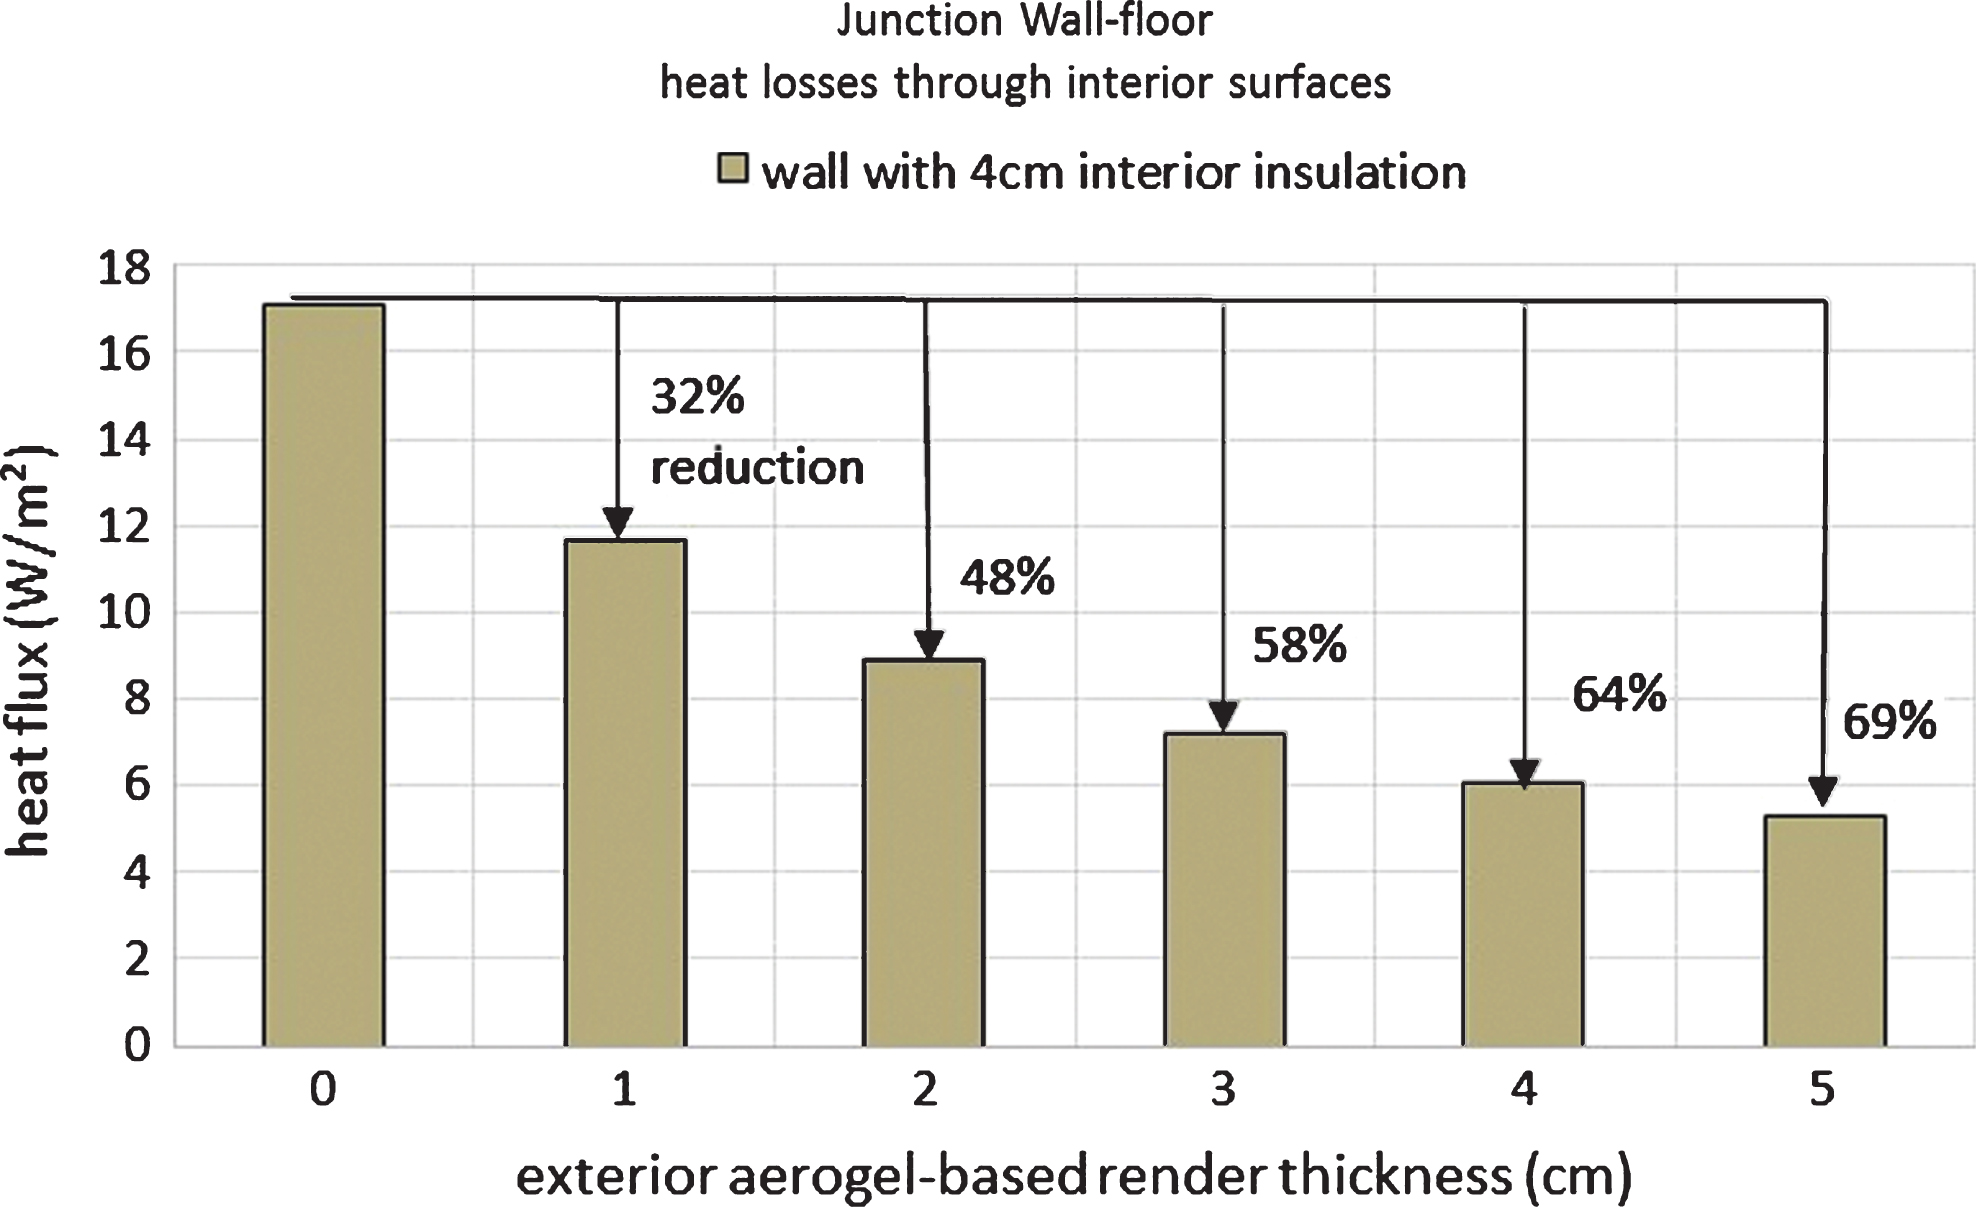 Wall (with 4 cm interior insulation) heat losses for a wall-floor junction for different exterior aerogel rendering’s thicknesses.